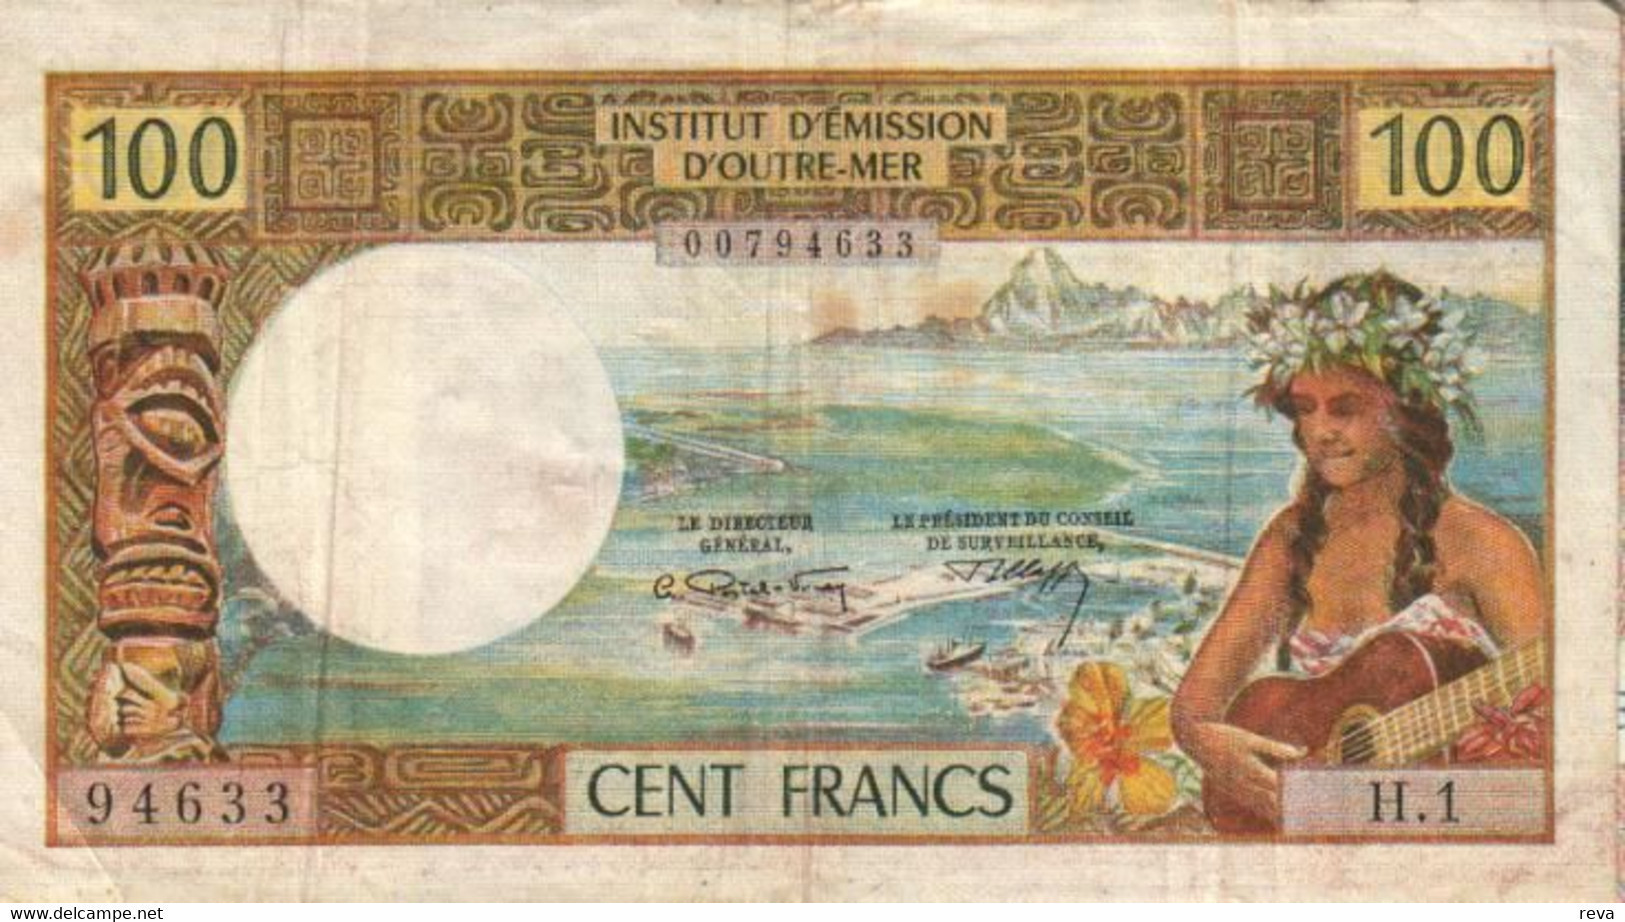 NEW CALEDONIA 100 FRANCS BROWN WOMAN HEAD FRONT &  BACK NOT DATED(1971) P61a SIG VARIETY F+ READ DESCRIPTION!! - Nouméa (Nuova Caledonia 1873-1985)